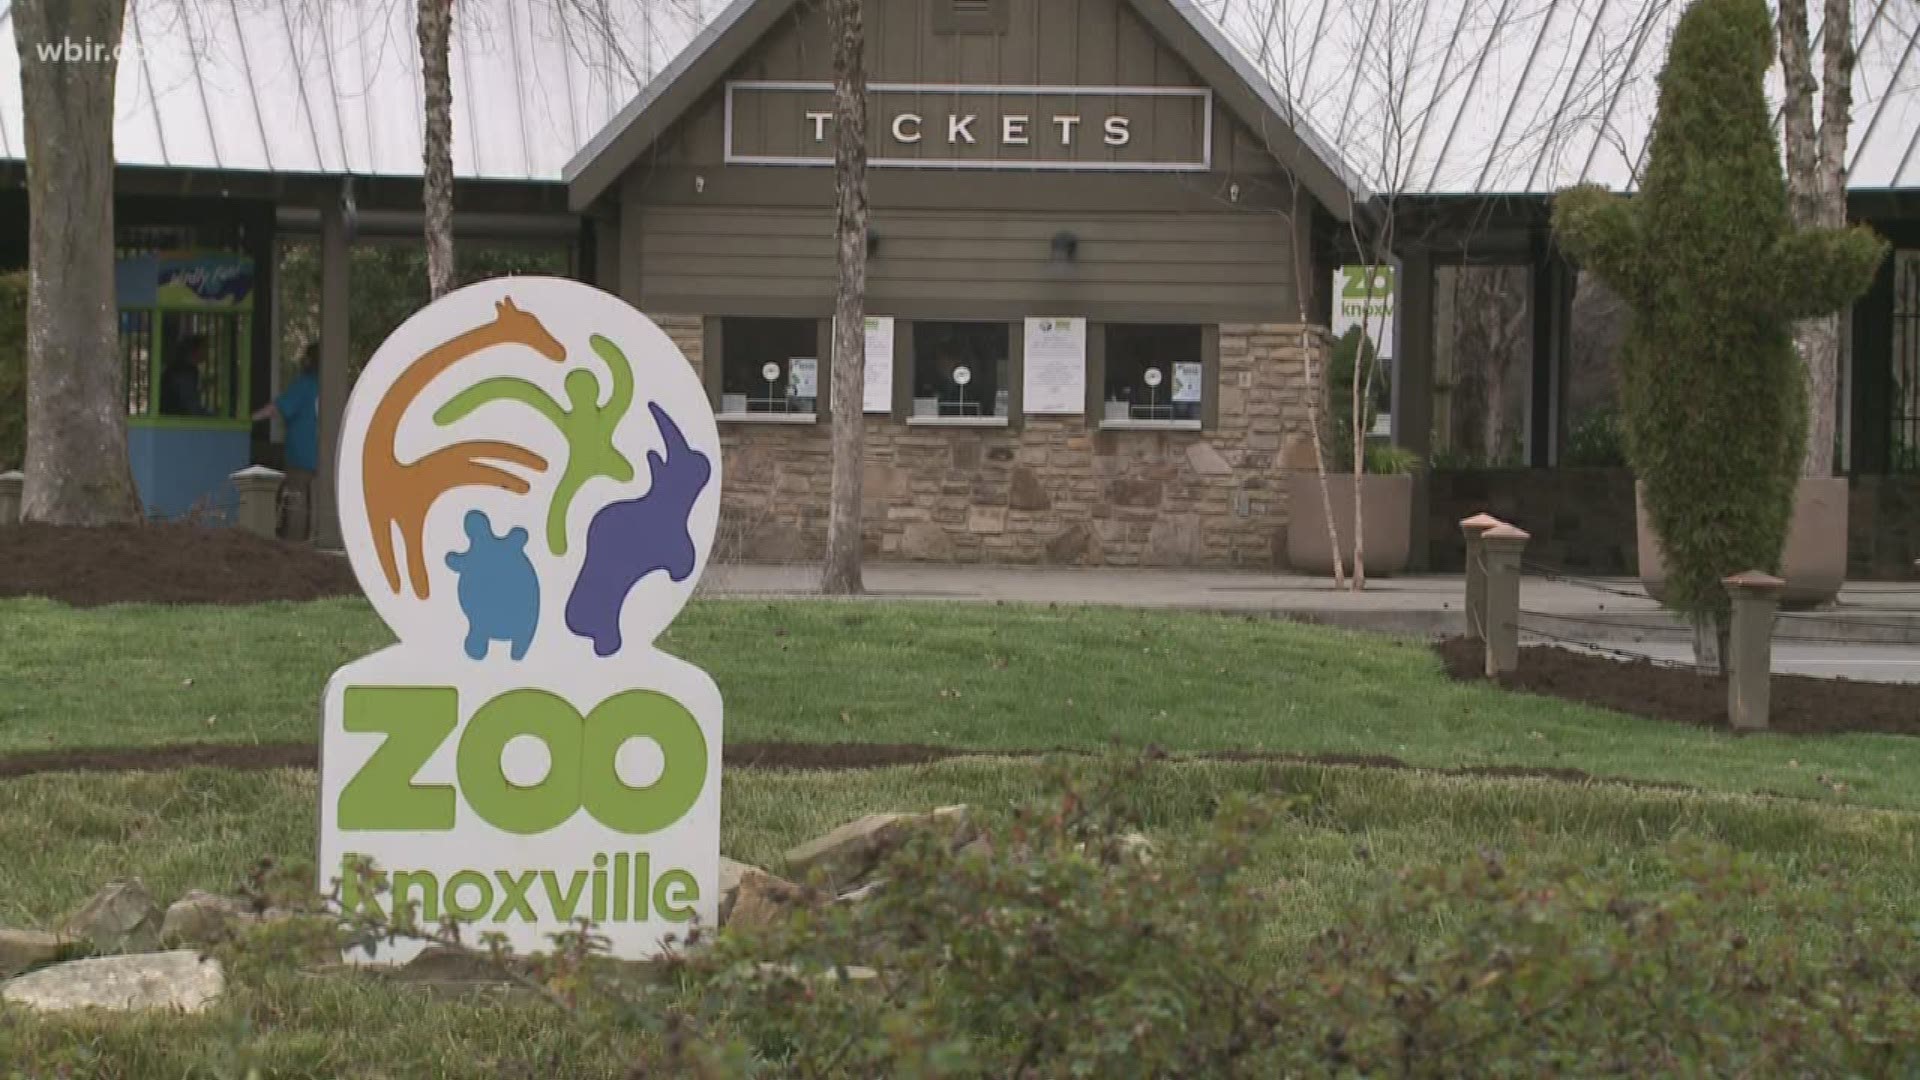 The Knoxville zoo is prepping for the Spring season with new attractions. One of them is called "wow moments" allows guests to come face to face with animals.